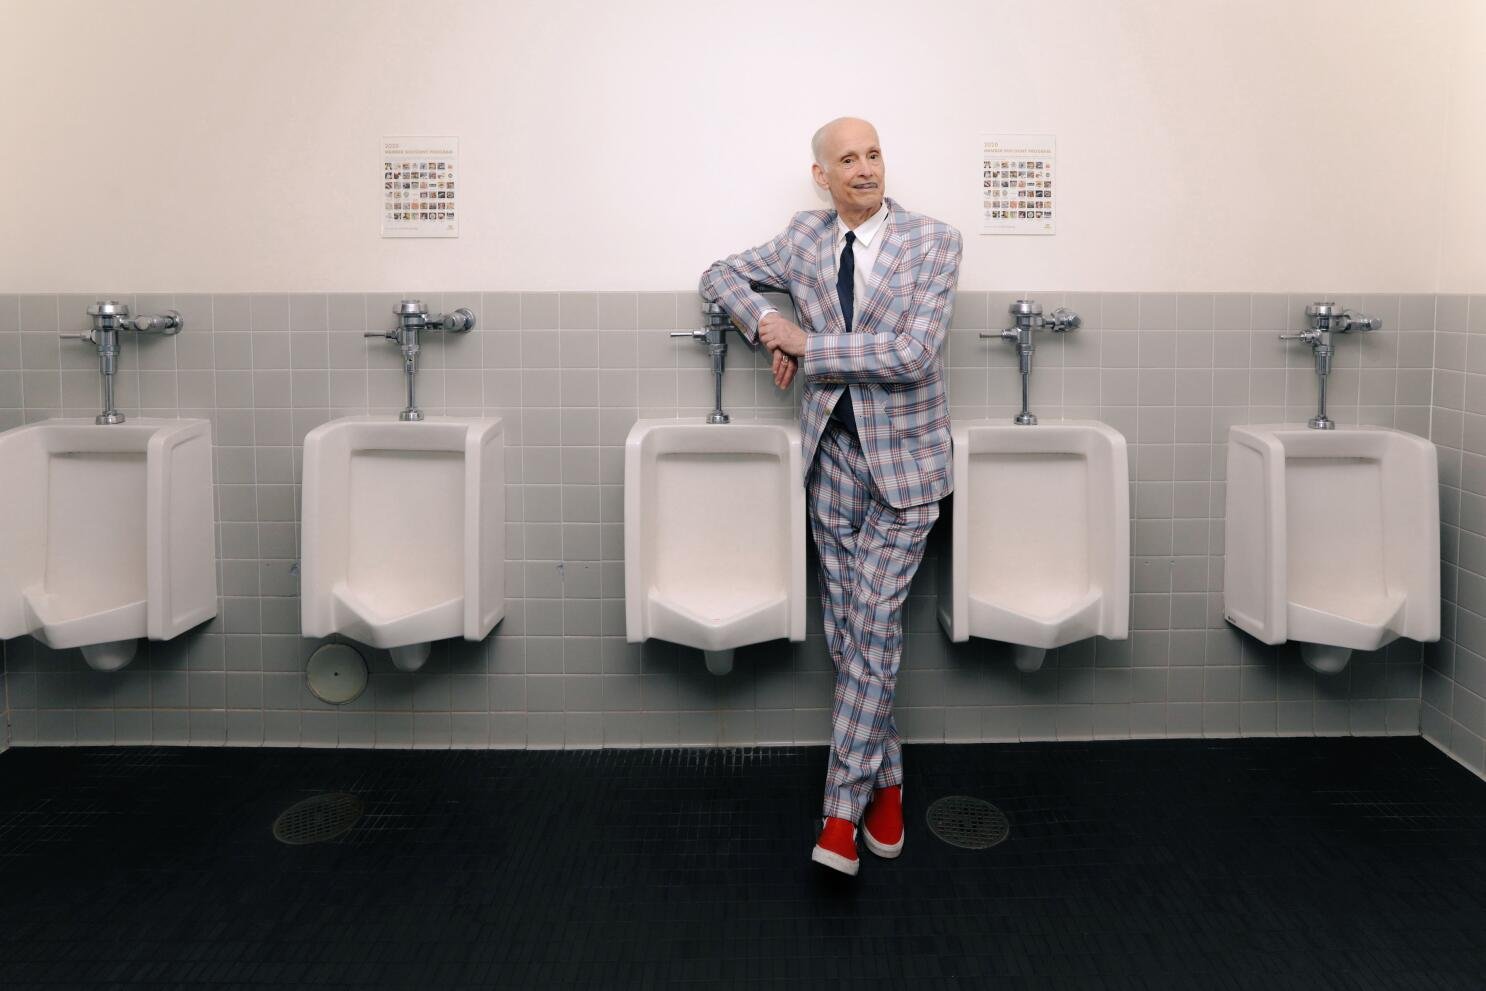 LOS ANGELES, CA - MAY 10, 2022 - - Ladies and gentlemen the, "Pope of Trash" and the "King of Puke," director John Waters strikes an elegant form before a discussion and book signing for his first book of fiction, "Liarmouth," at the Aratani Theater in Los Angeles on May 10, 2022. Waters has written several non-fiction books like, "Carsick," "Make Trouble," "Role Models," and "Mr. Know-It-All.:" Waters has been a film provocateur and camp legend for years with films such as, "Pink Flamingos," Female Trouble," "Cry Baby," "Polyester," "Hairspray," "Pecker," and "Serial Mom." (Genaro Molina / Los Angeles Times)